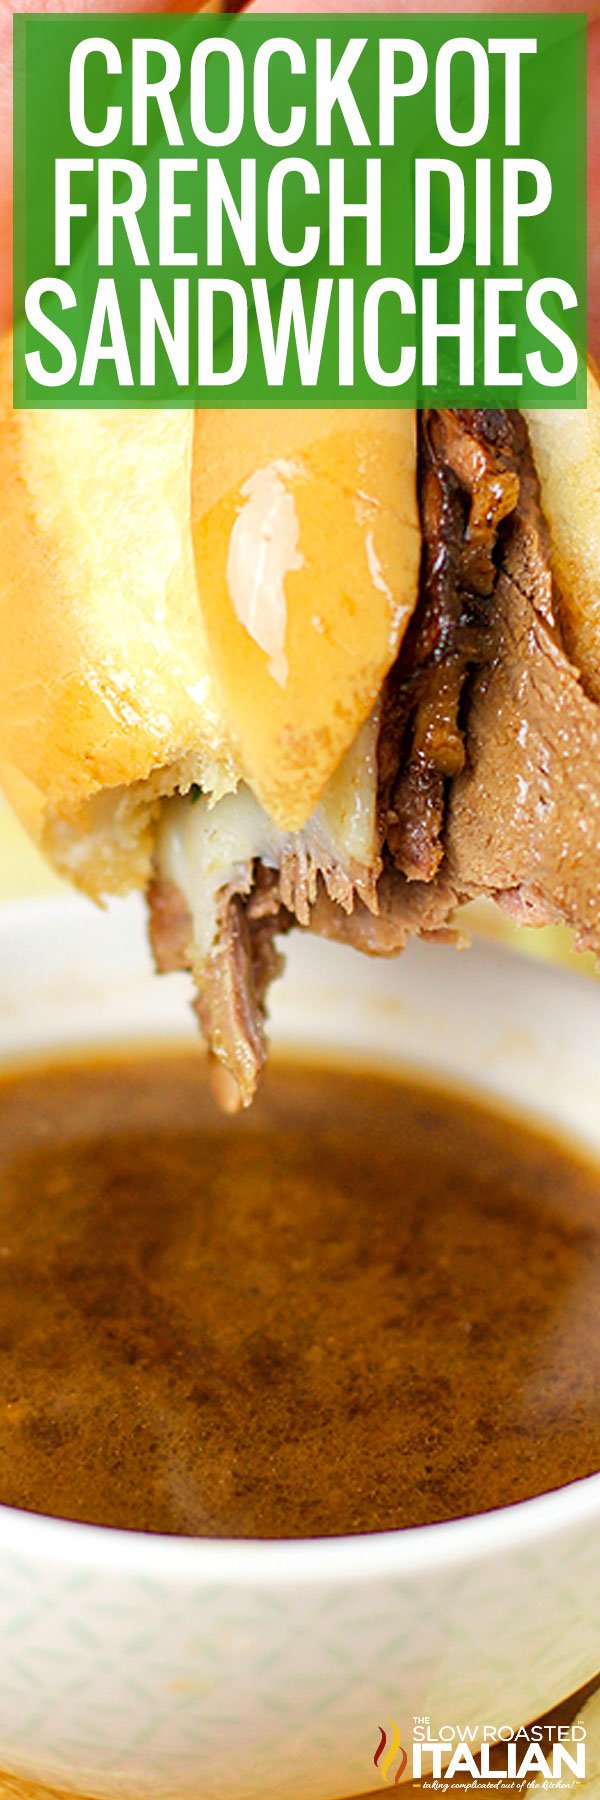 titled image (and shown): crockpot french dip sandwiches